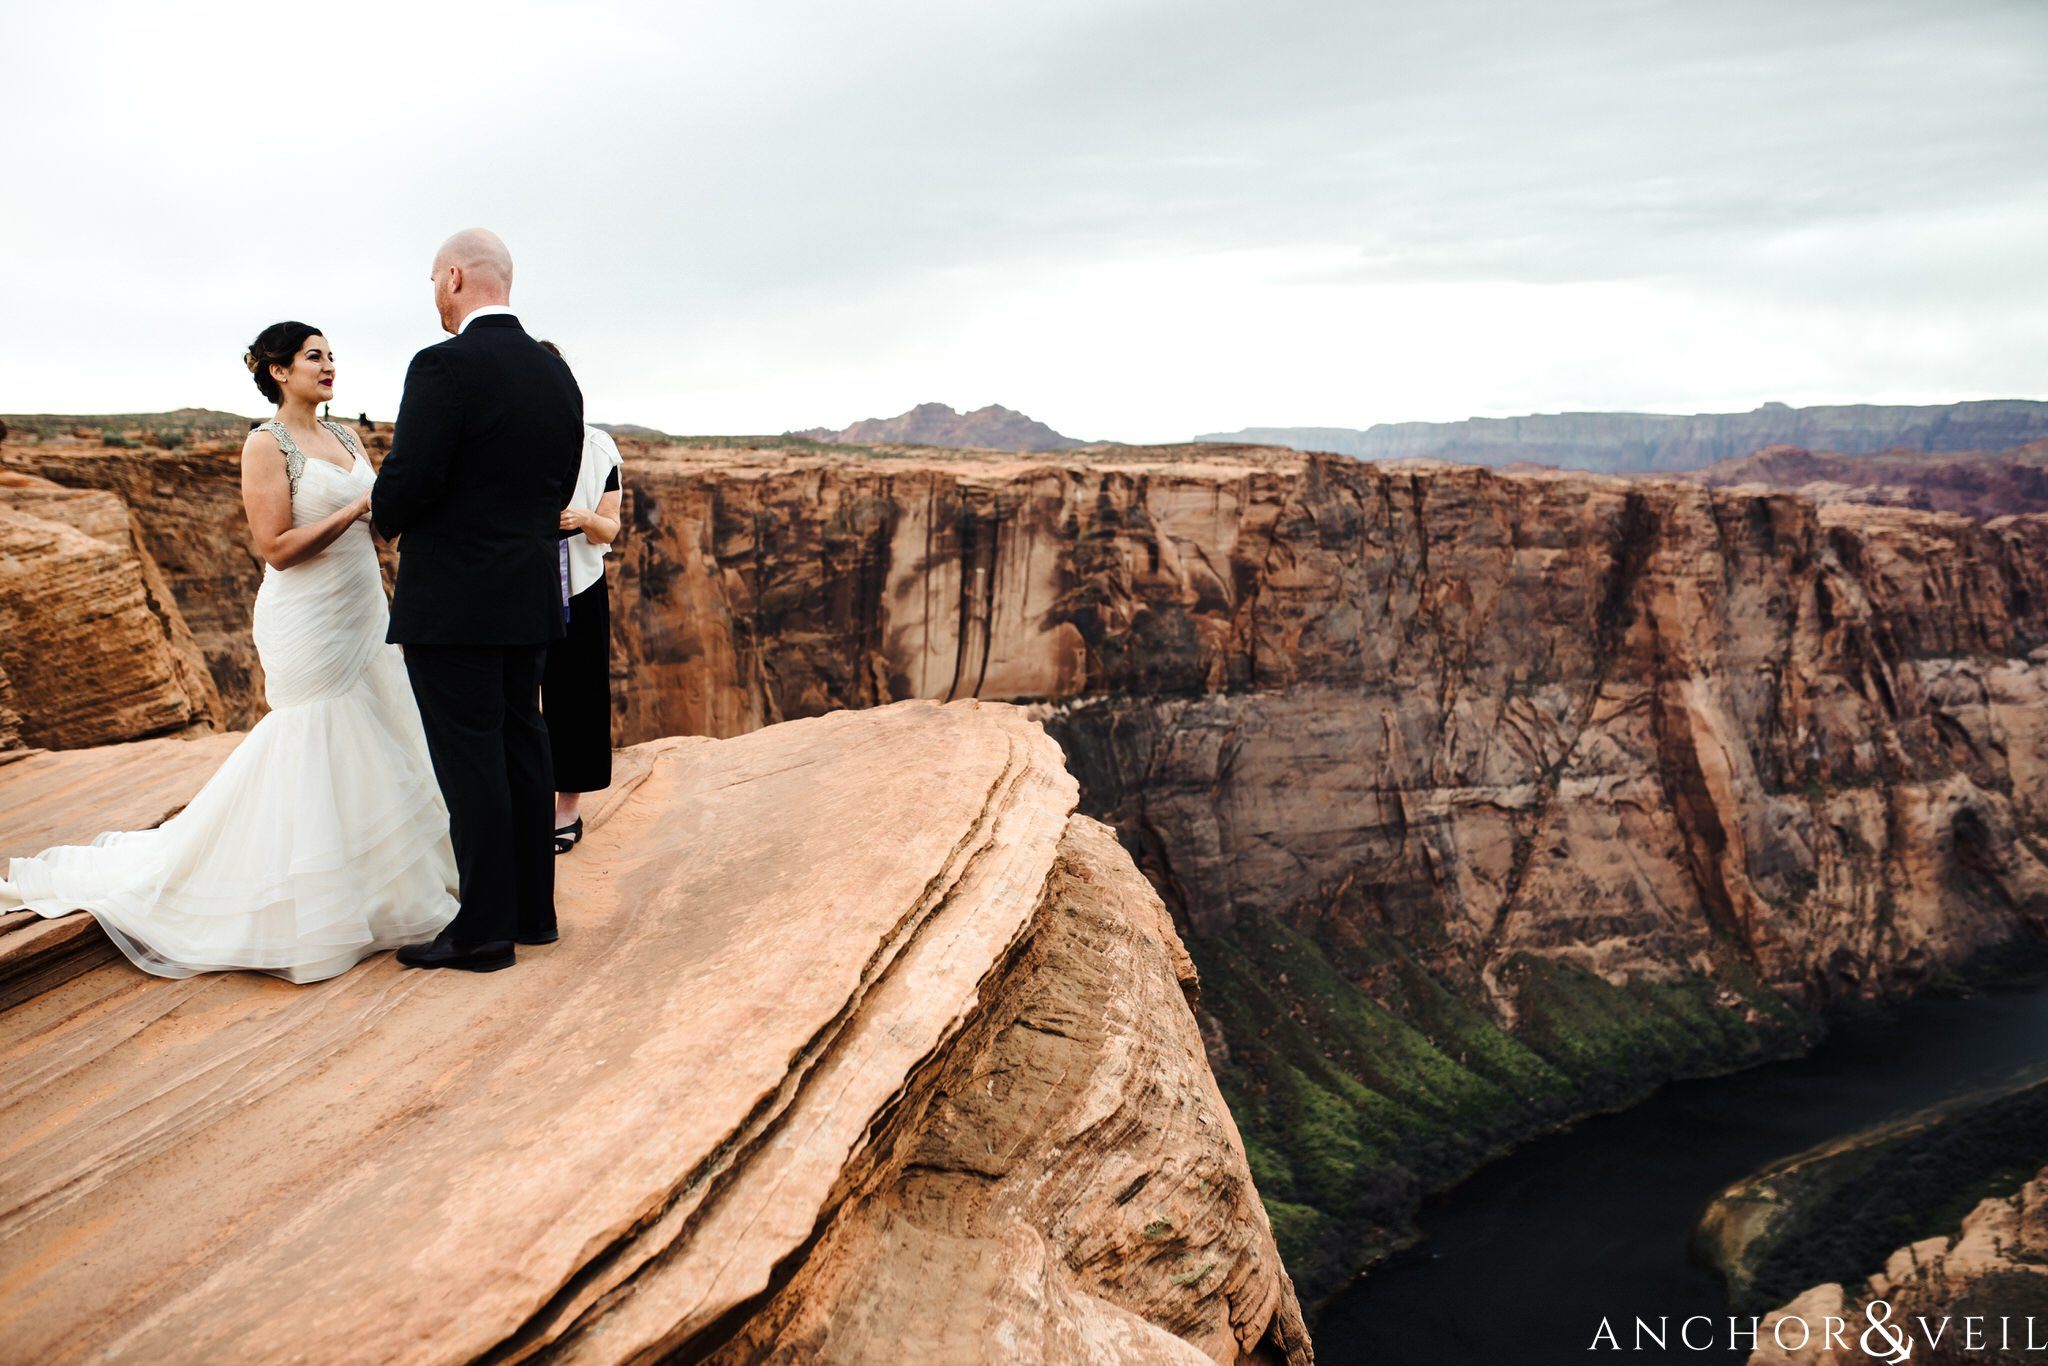 the water during their Horseshoe Bend Elopement Wedding